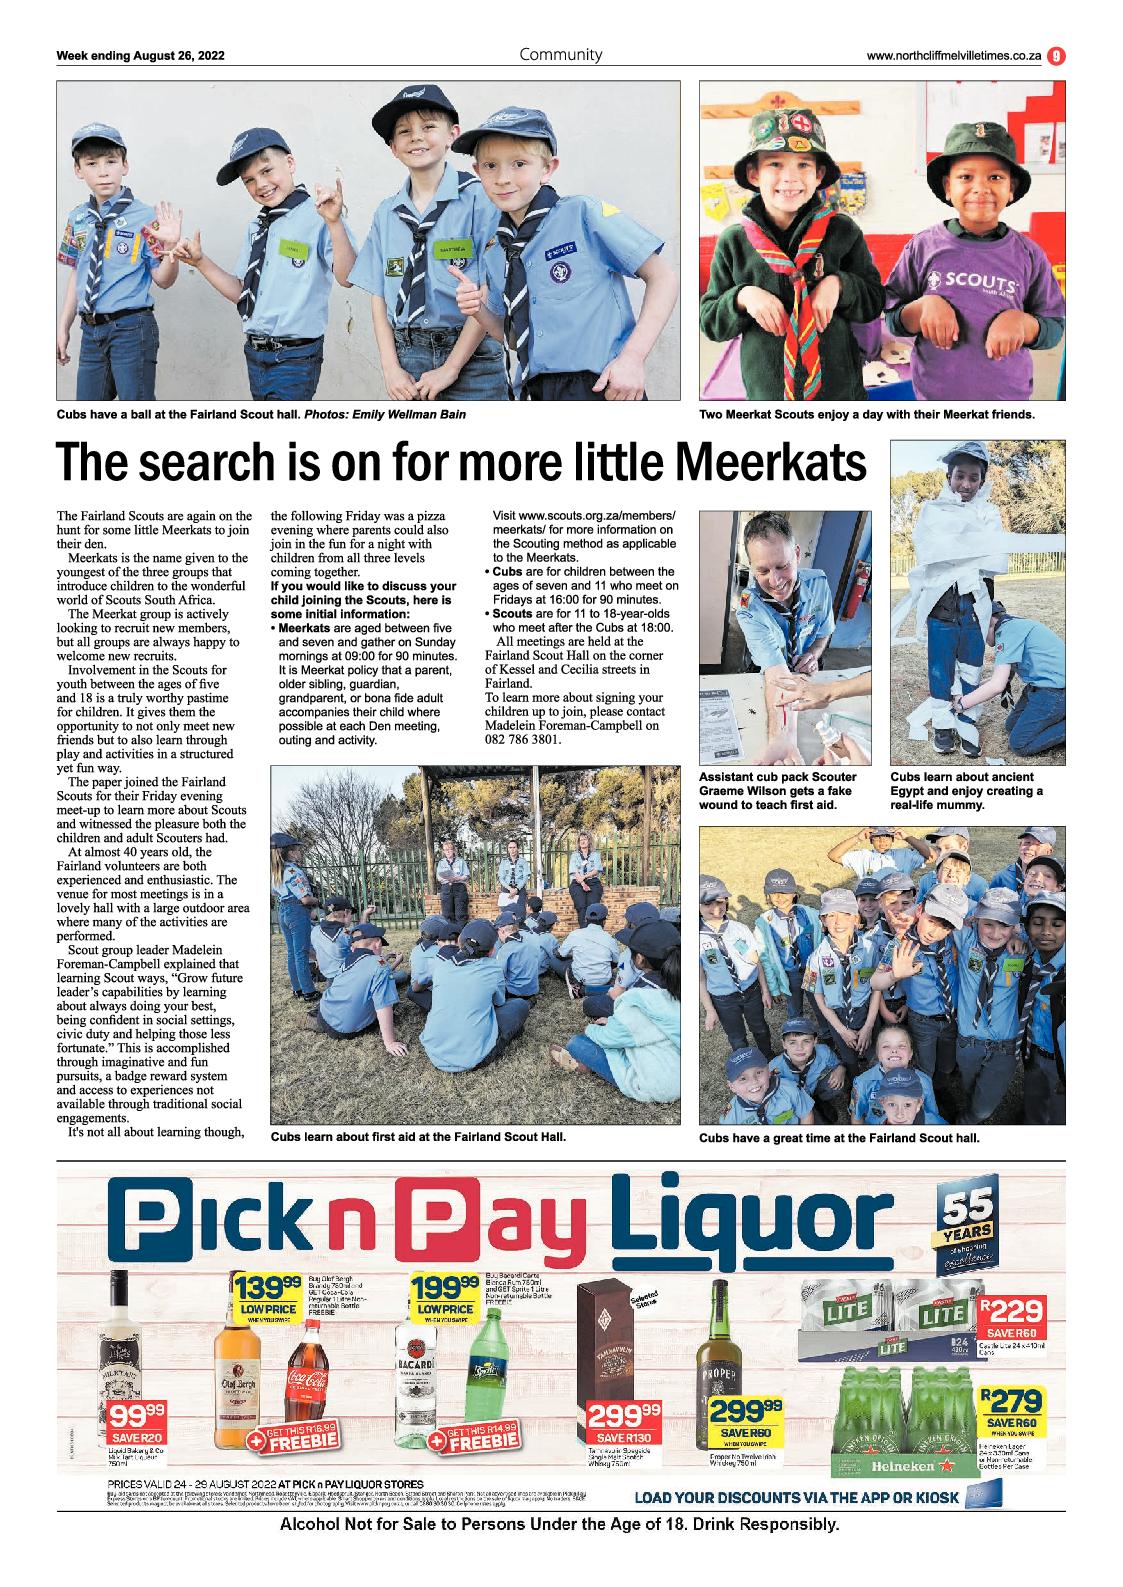 Northcliff Melville Times August 26 2022 page 9